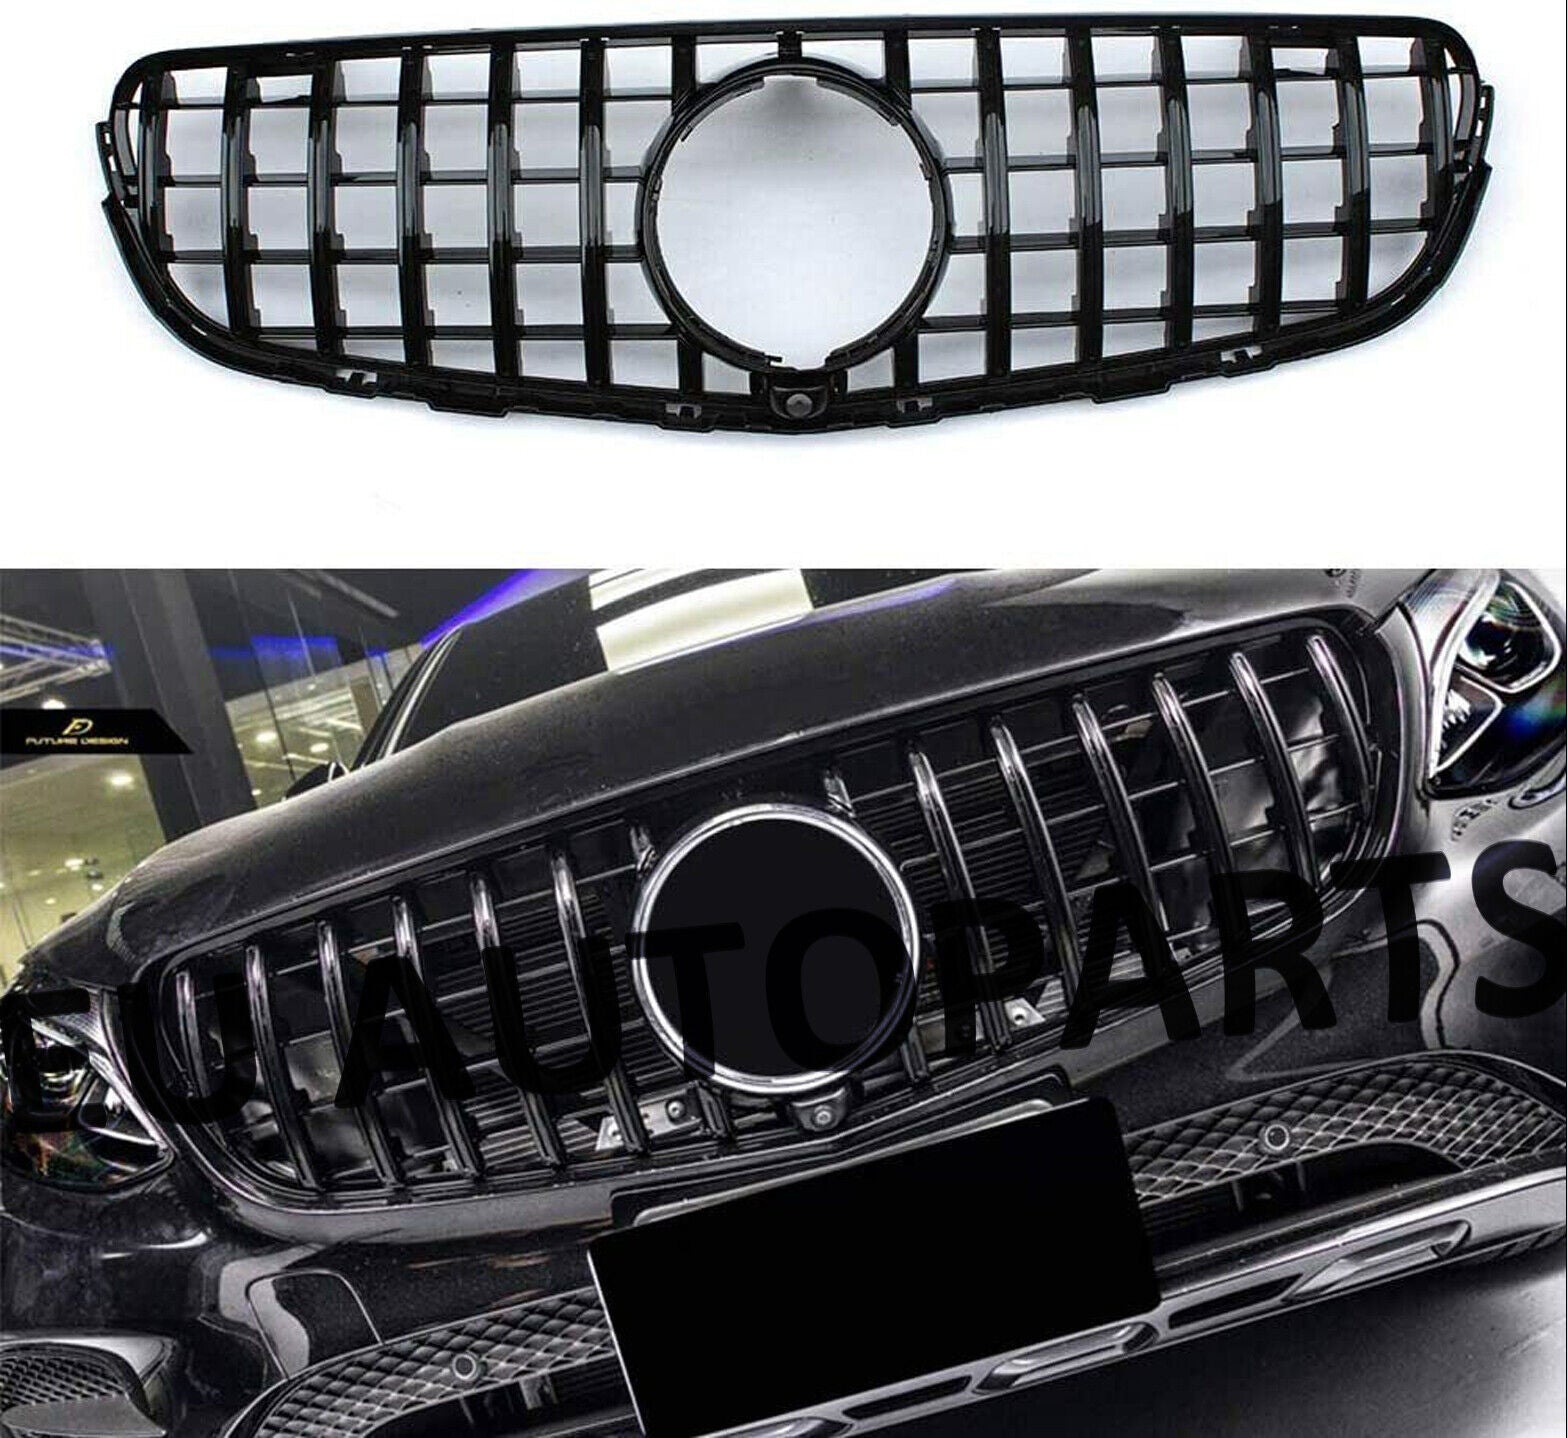 Mercedes GLC Class W253 Grill Black Panamericana GT Style – Carbon Accents